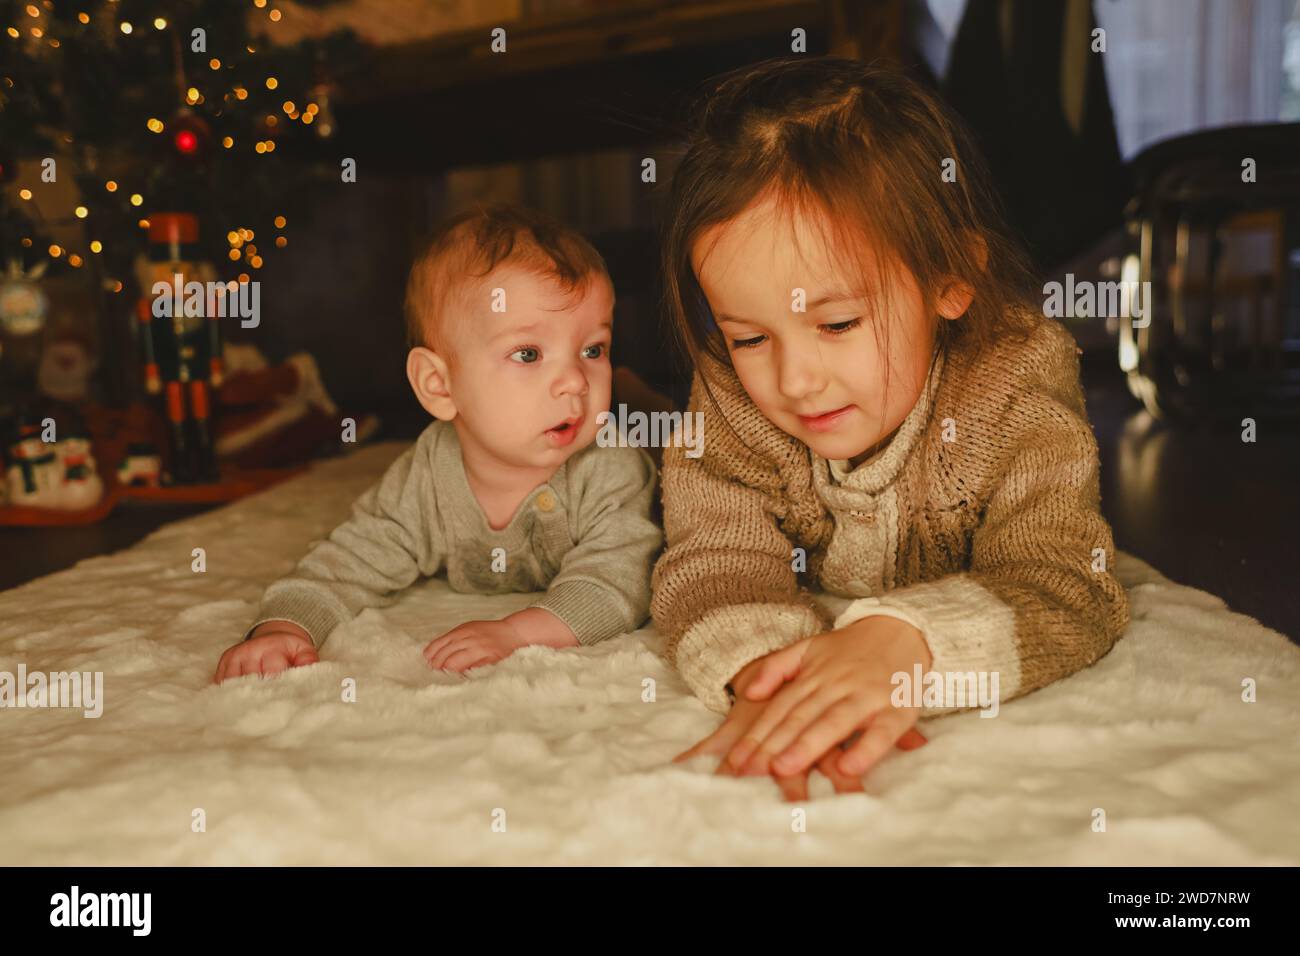 little girl and baby near the christmas tree, christmas celebrate Stock Photo